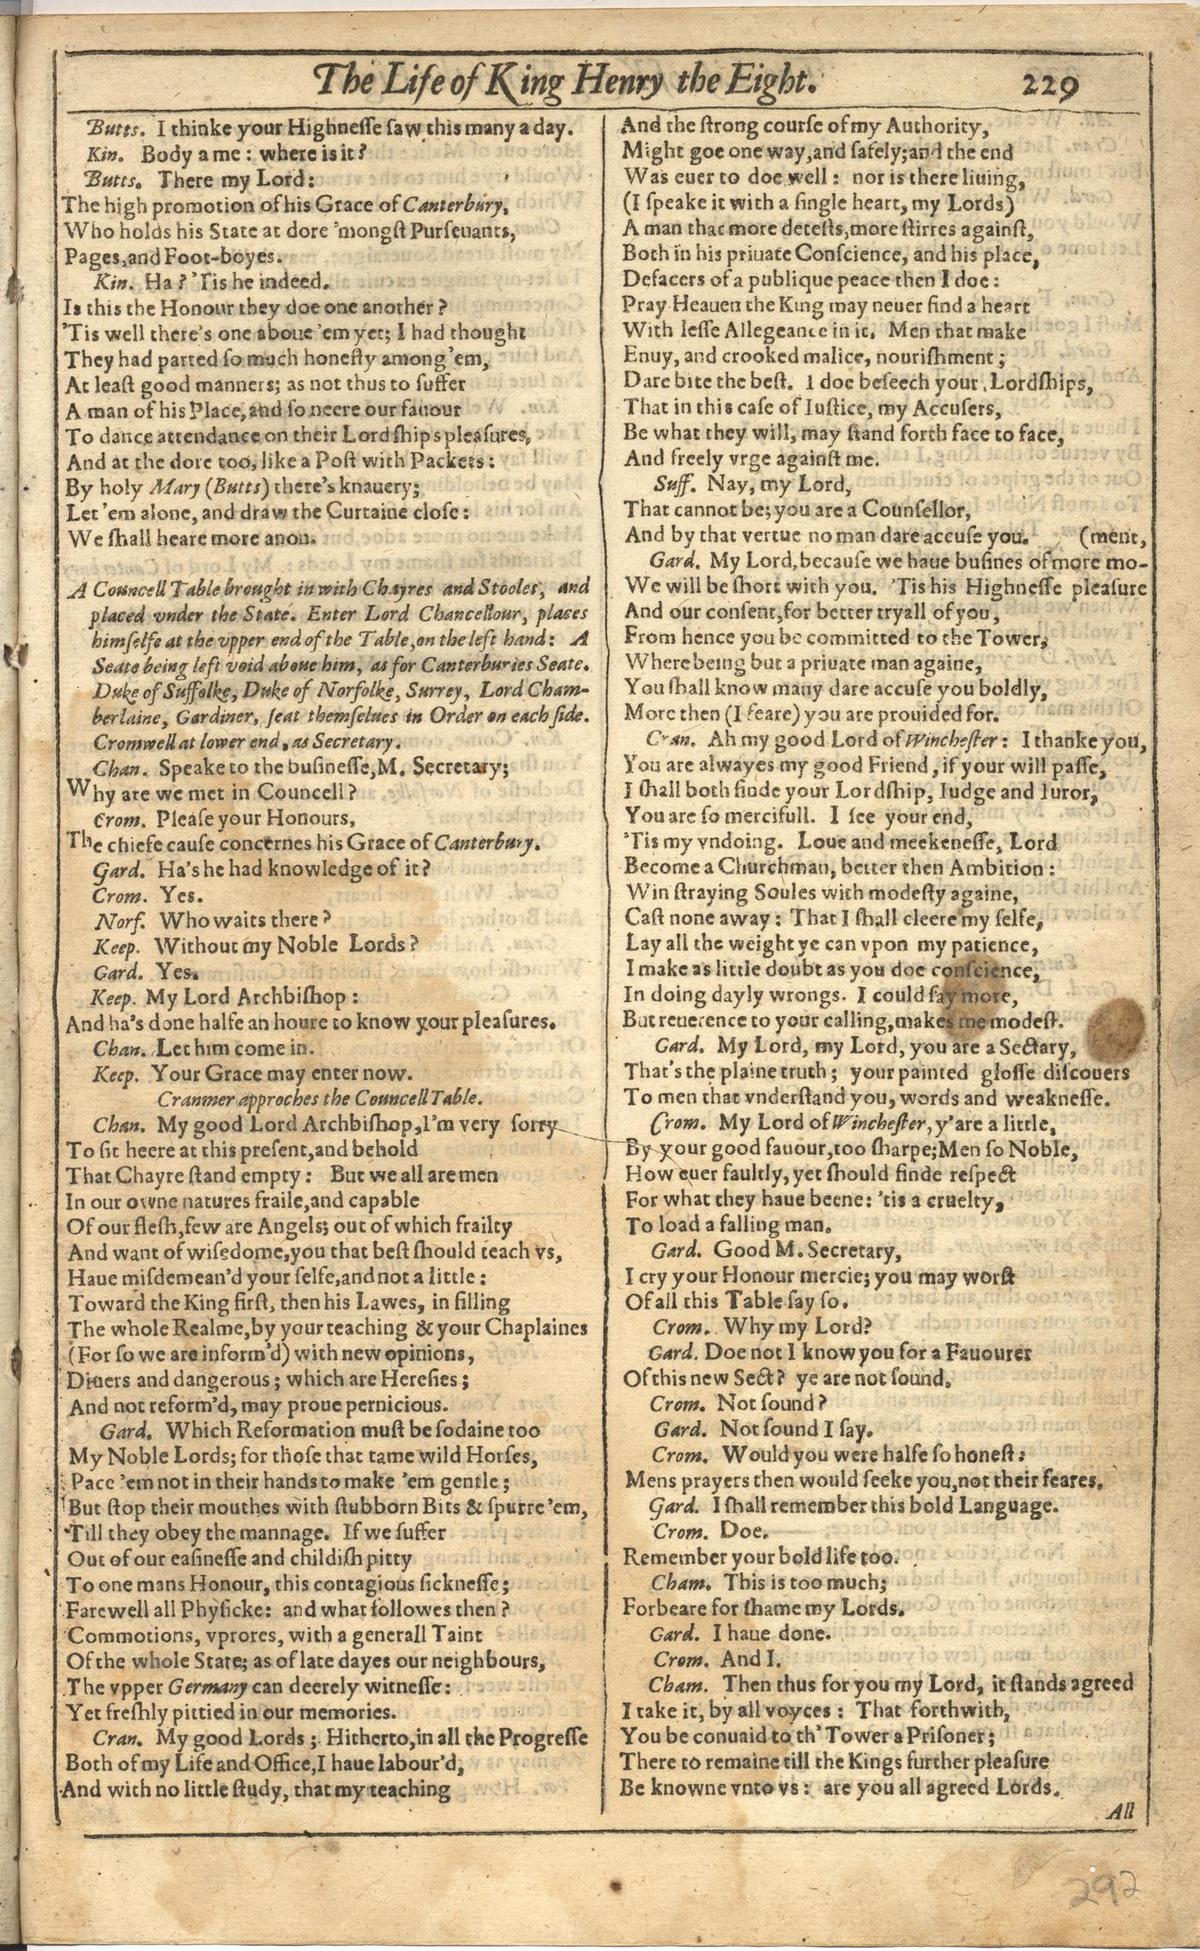 Image of page 583